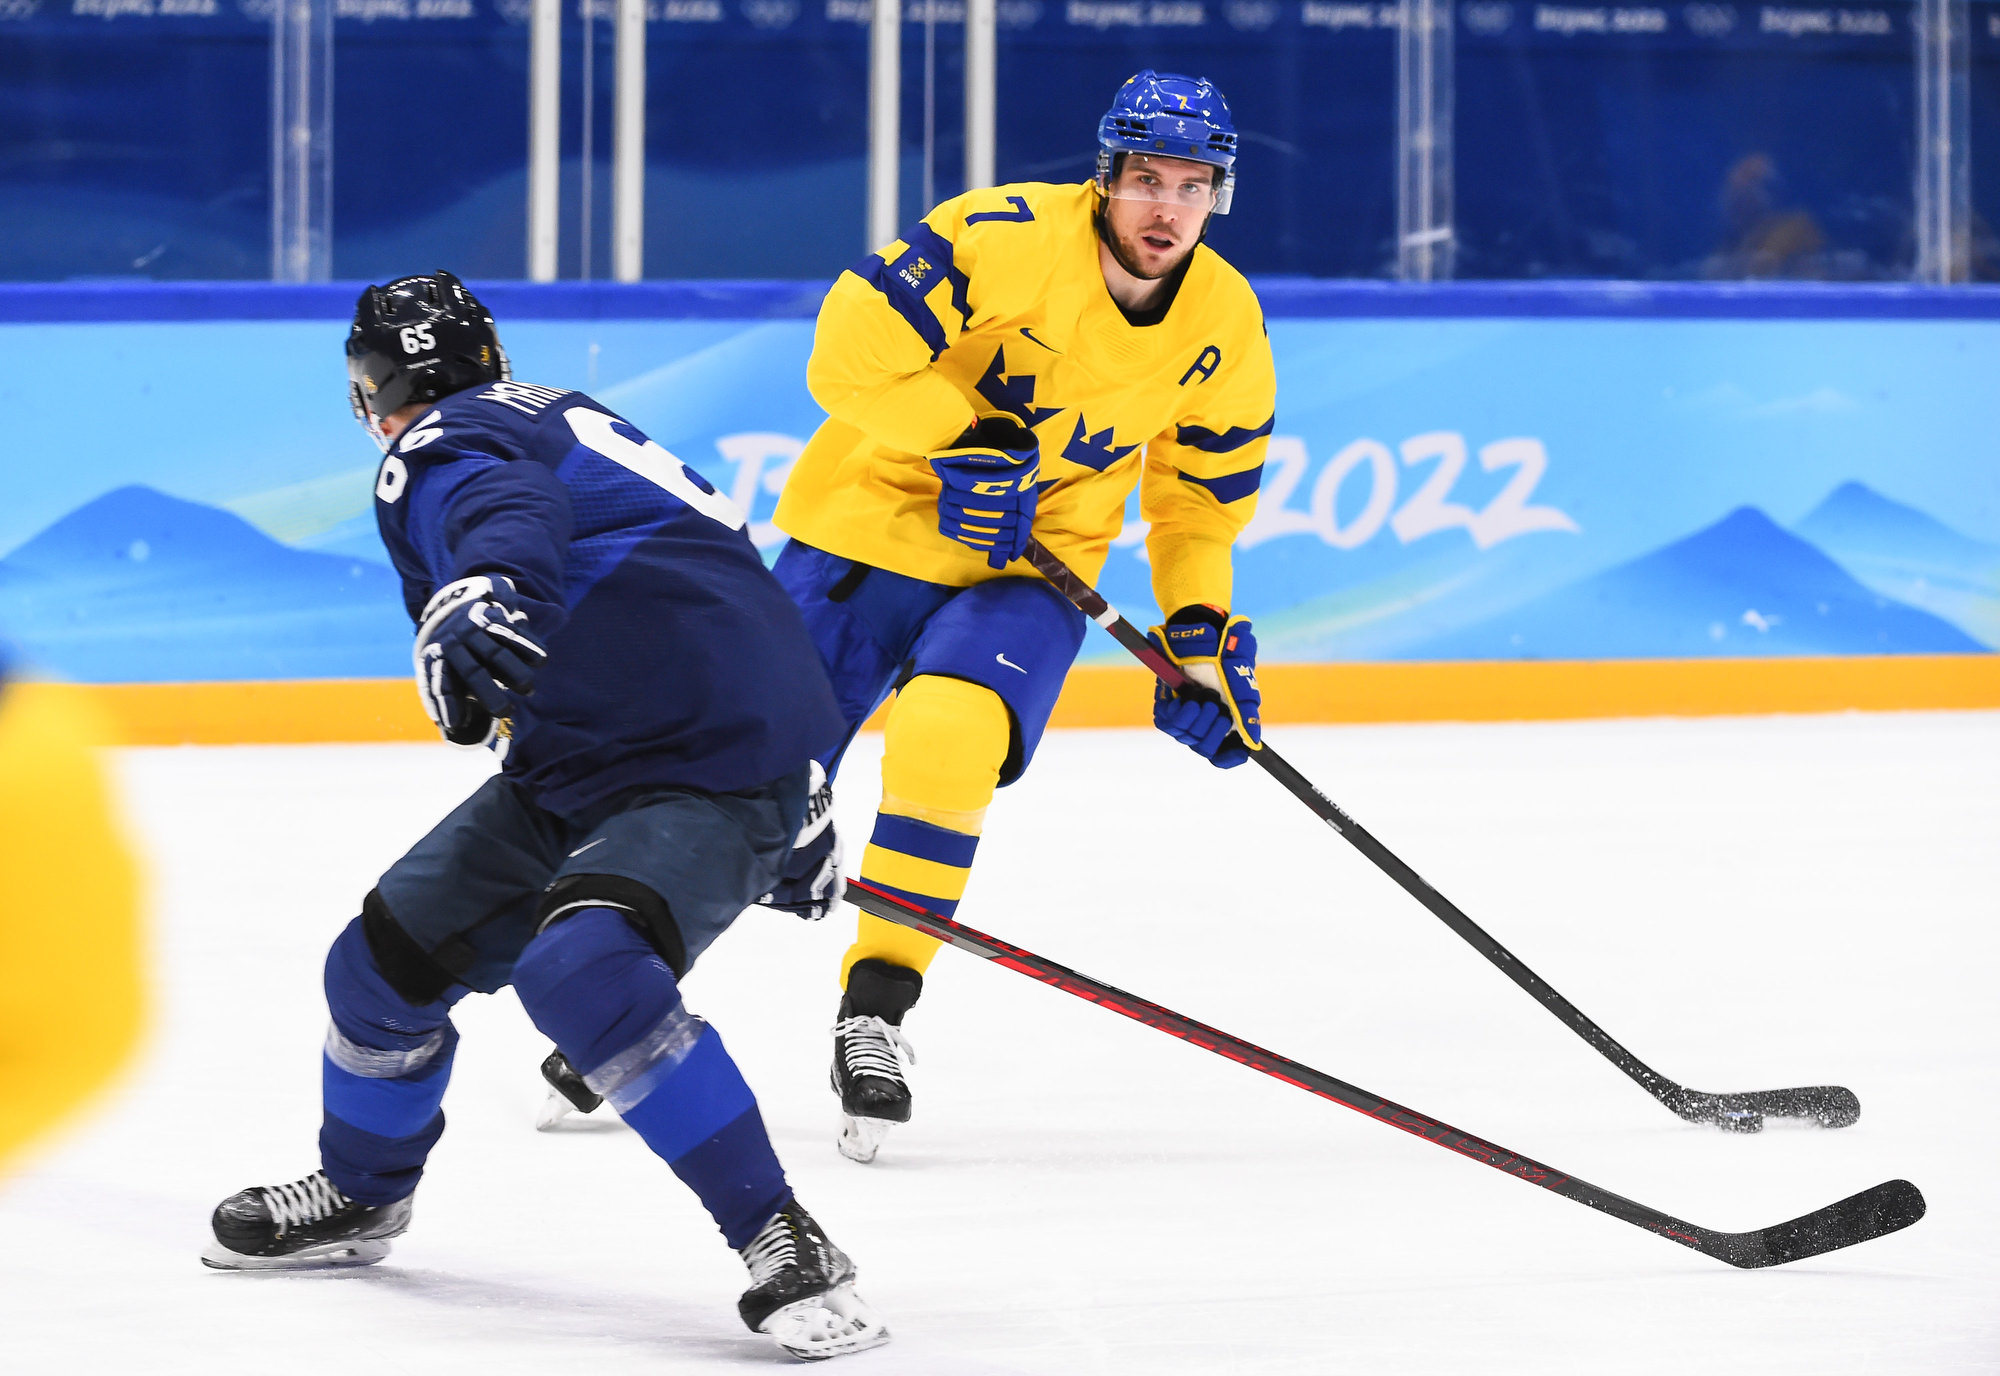 Redesigning Denmark, Sweden and Finland's 2022 Olympic Hockey